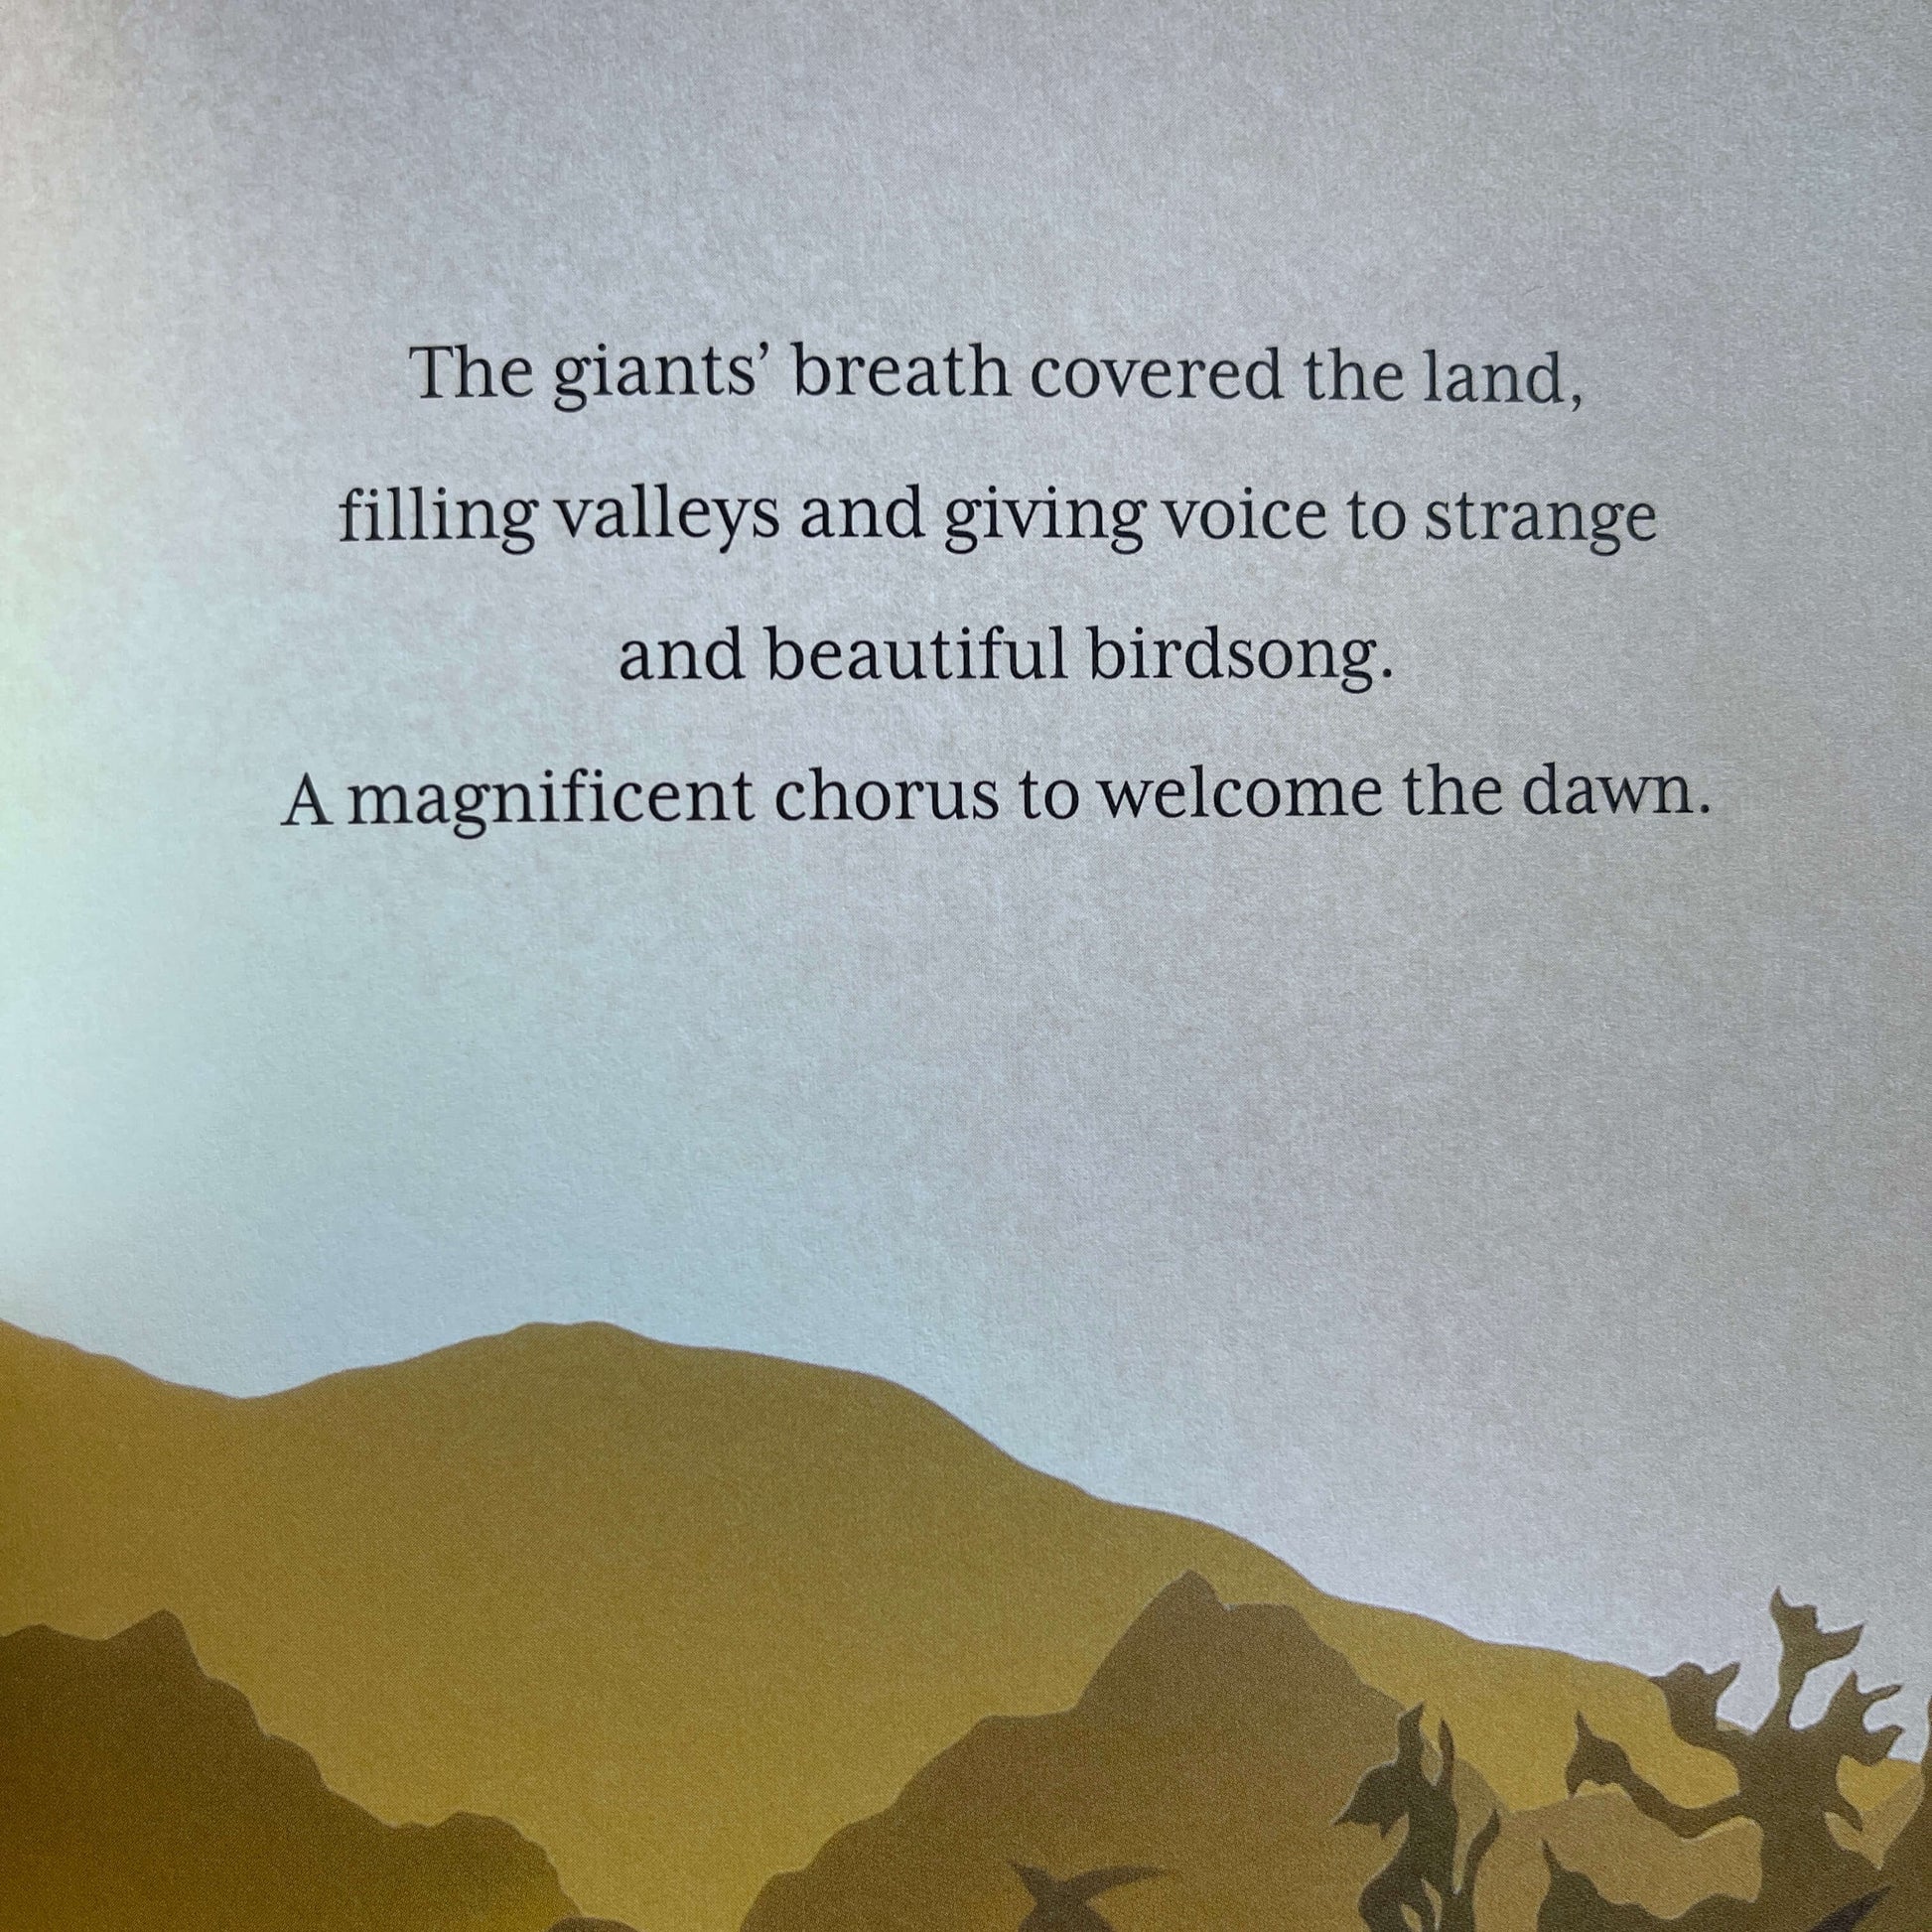 Pages from the childrens book Kowhai and the Giants by Kate Parker.